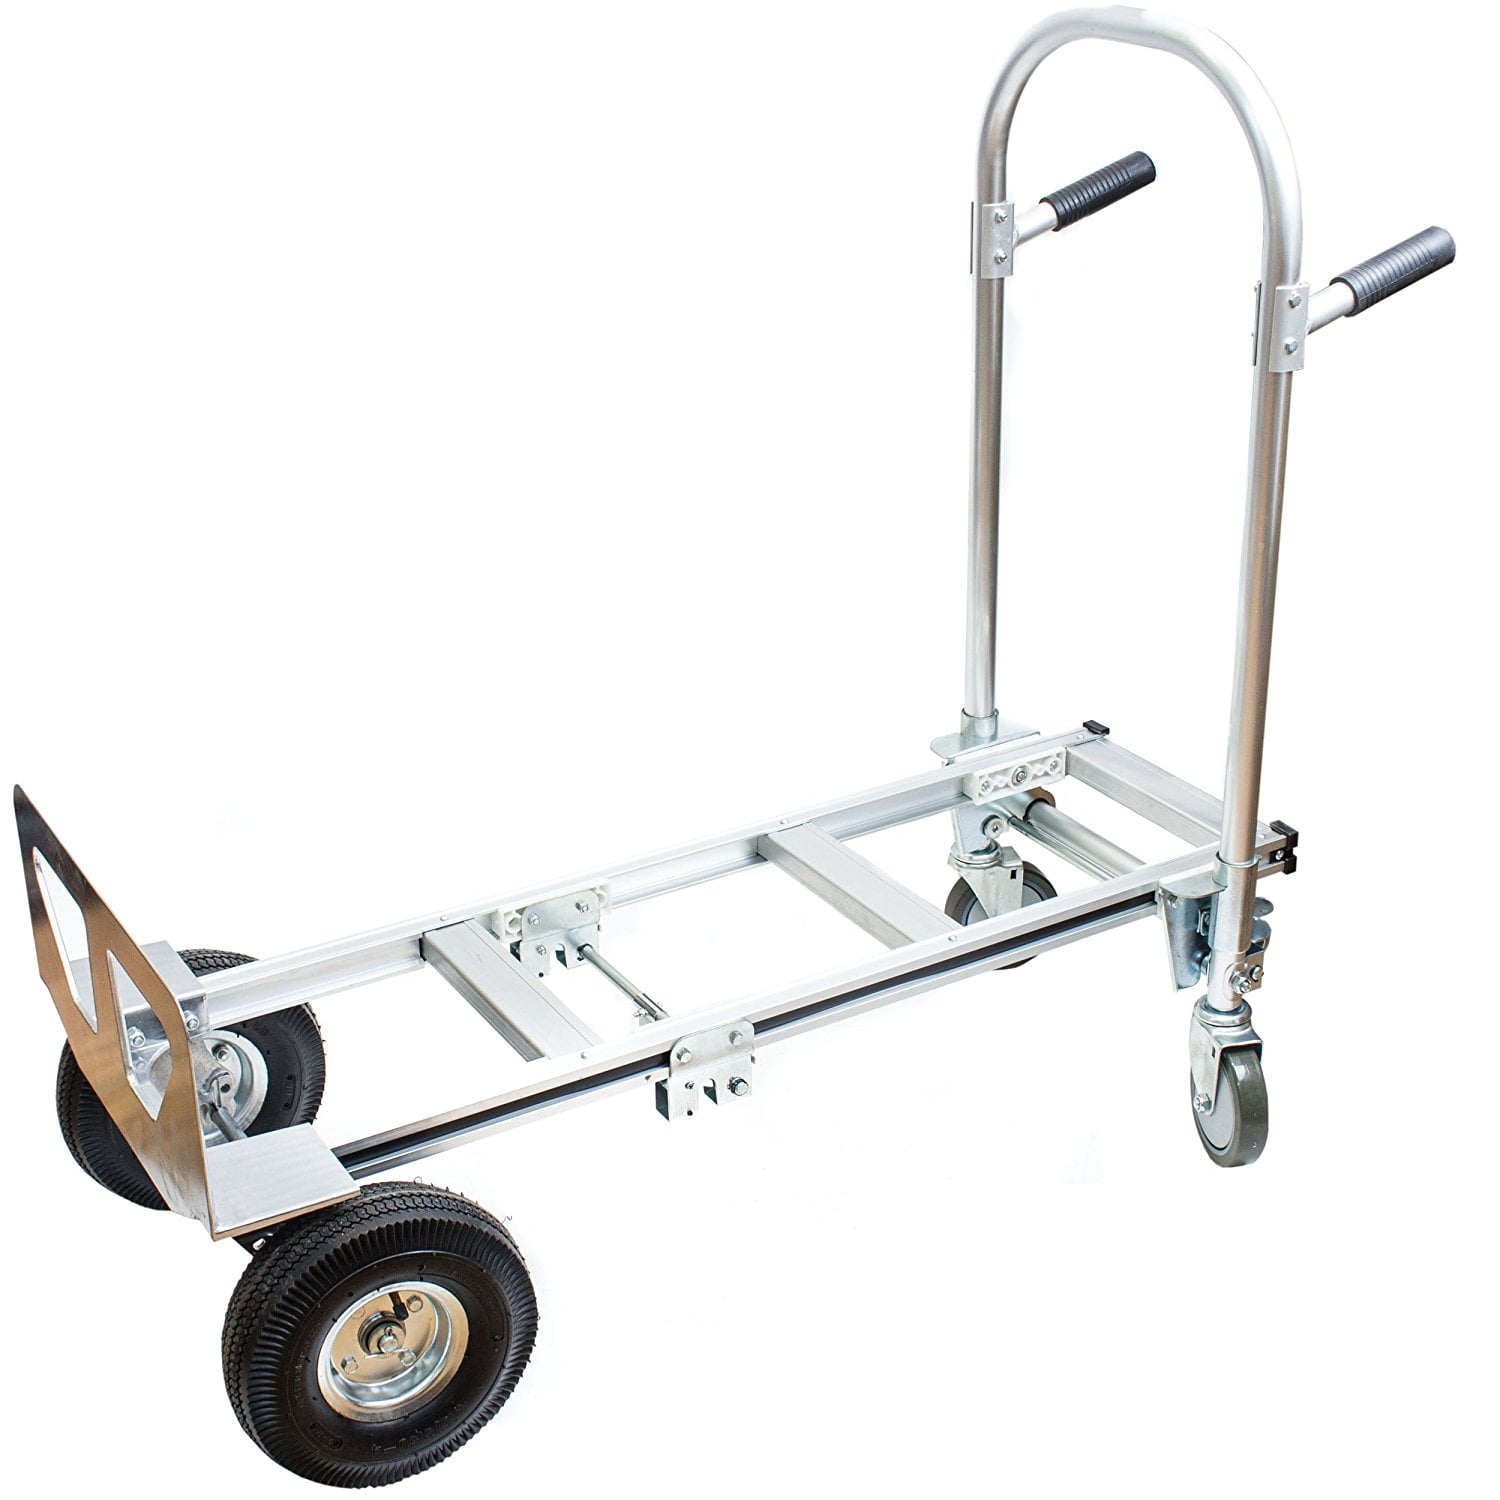 Stair Climber Local Pickup Only NK Heavy Duty PT-007 Aluminum Hand Truck 